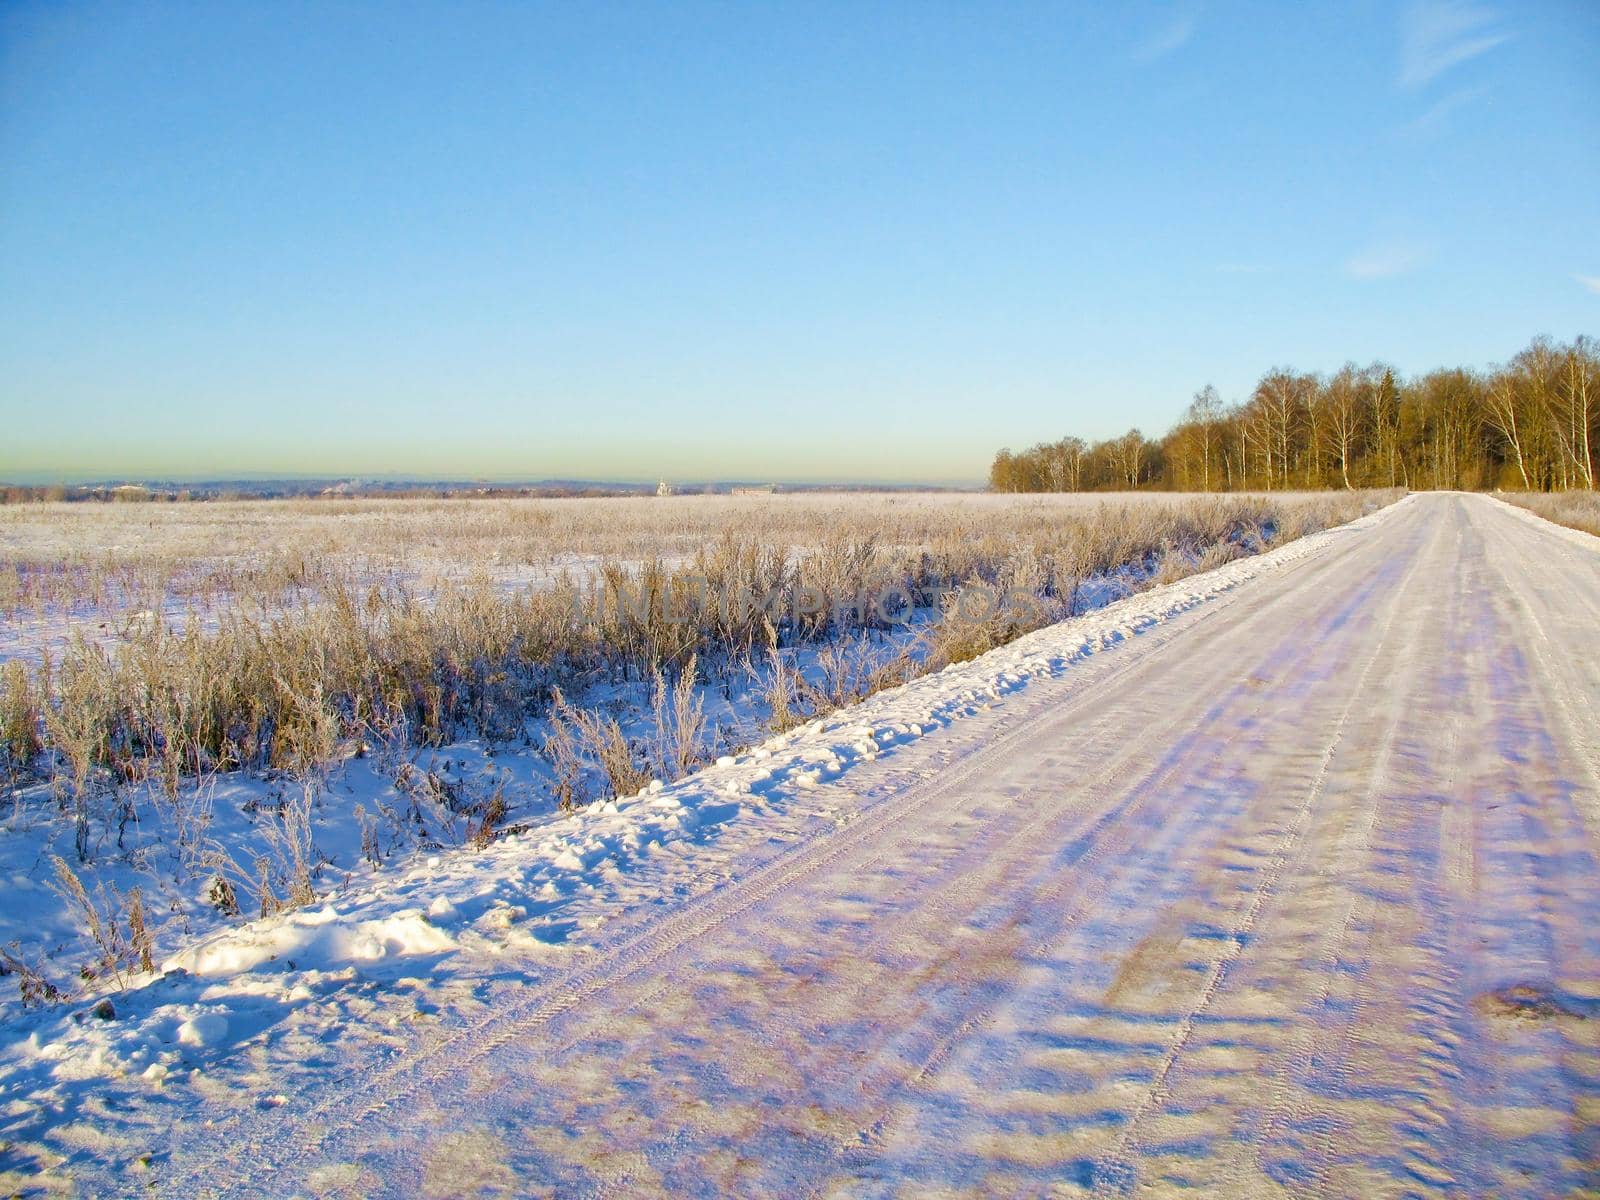 The snow-covered road is an early, sunny, frosty morning in the suburbs.